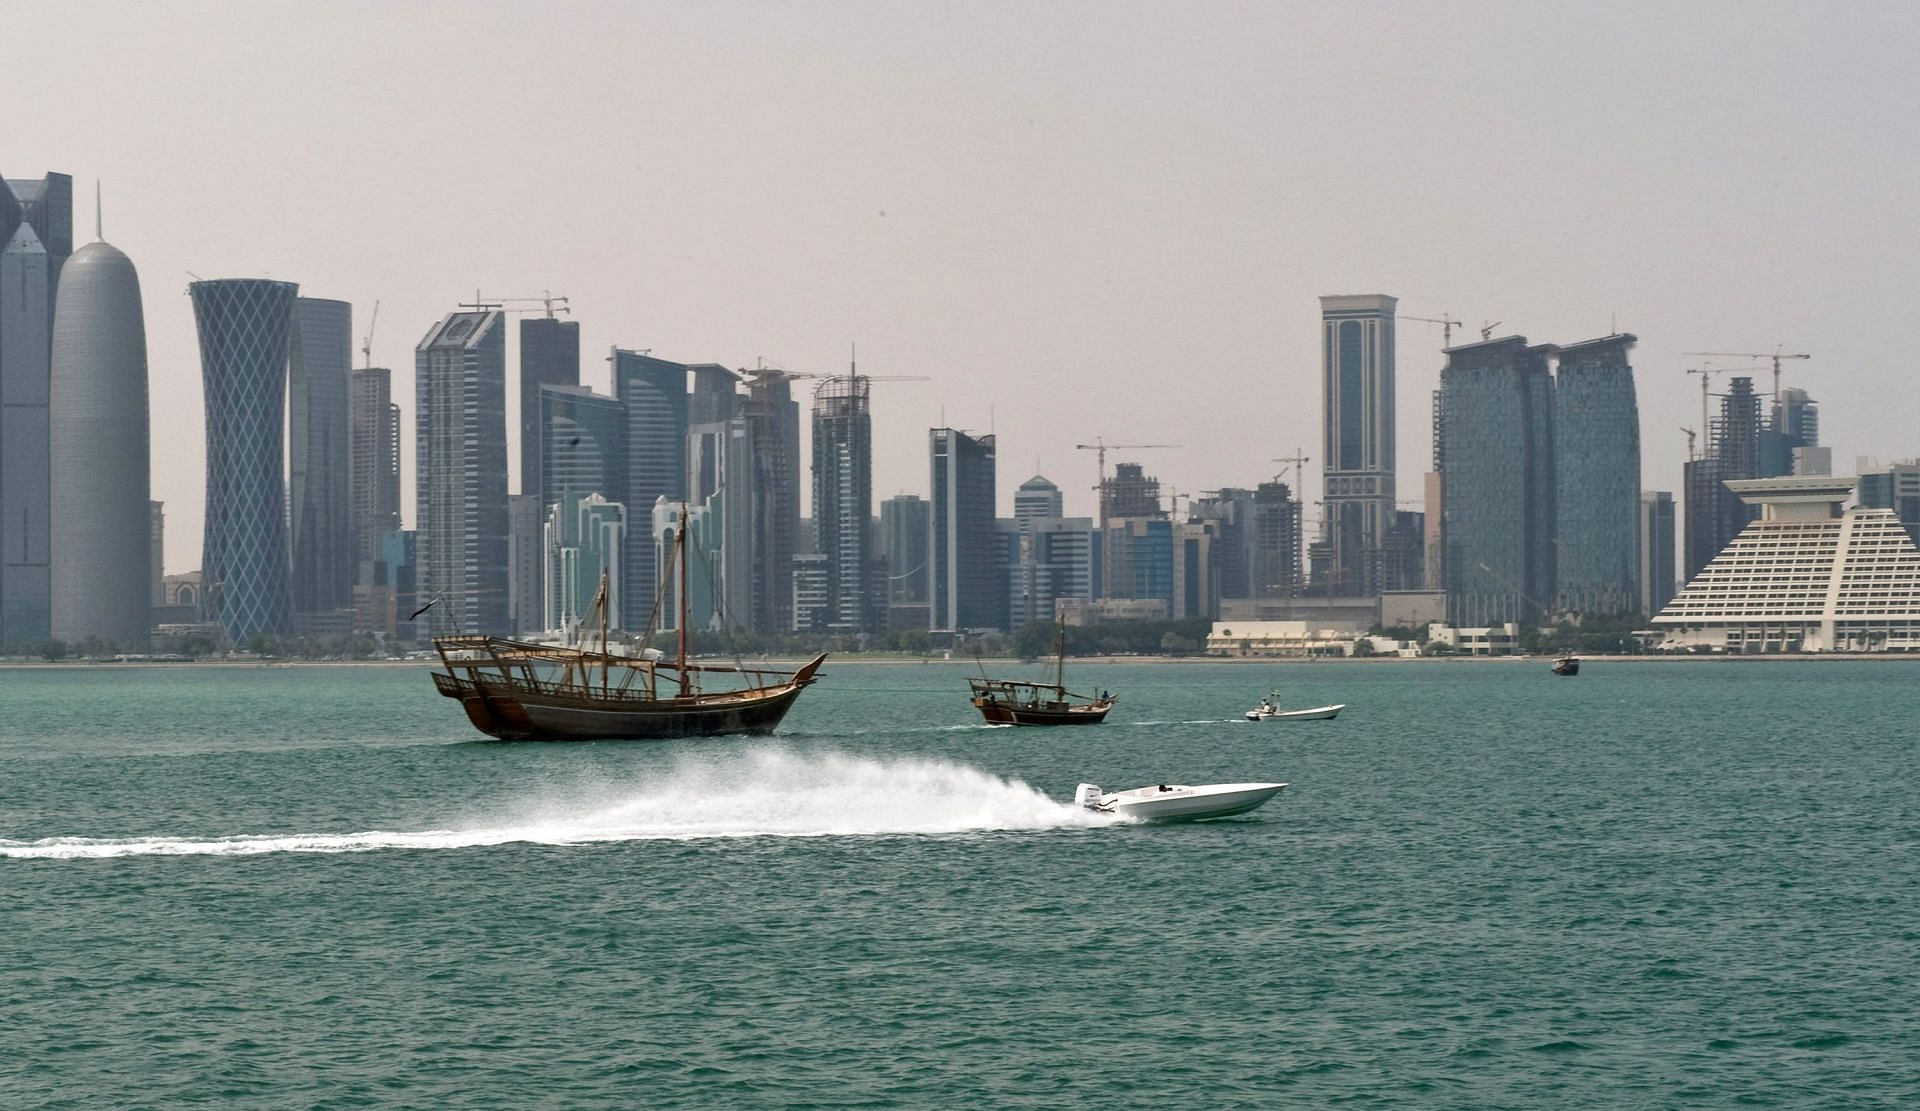 A general view of traditional boats in front of the Doha skyline ahead of the 2010 Qatar GP (MotoGP) at Losail Circuit in Doha, Qatar. (Photo by Mirco Lazzari gp/Getty Images)